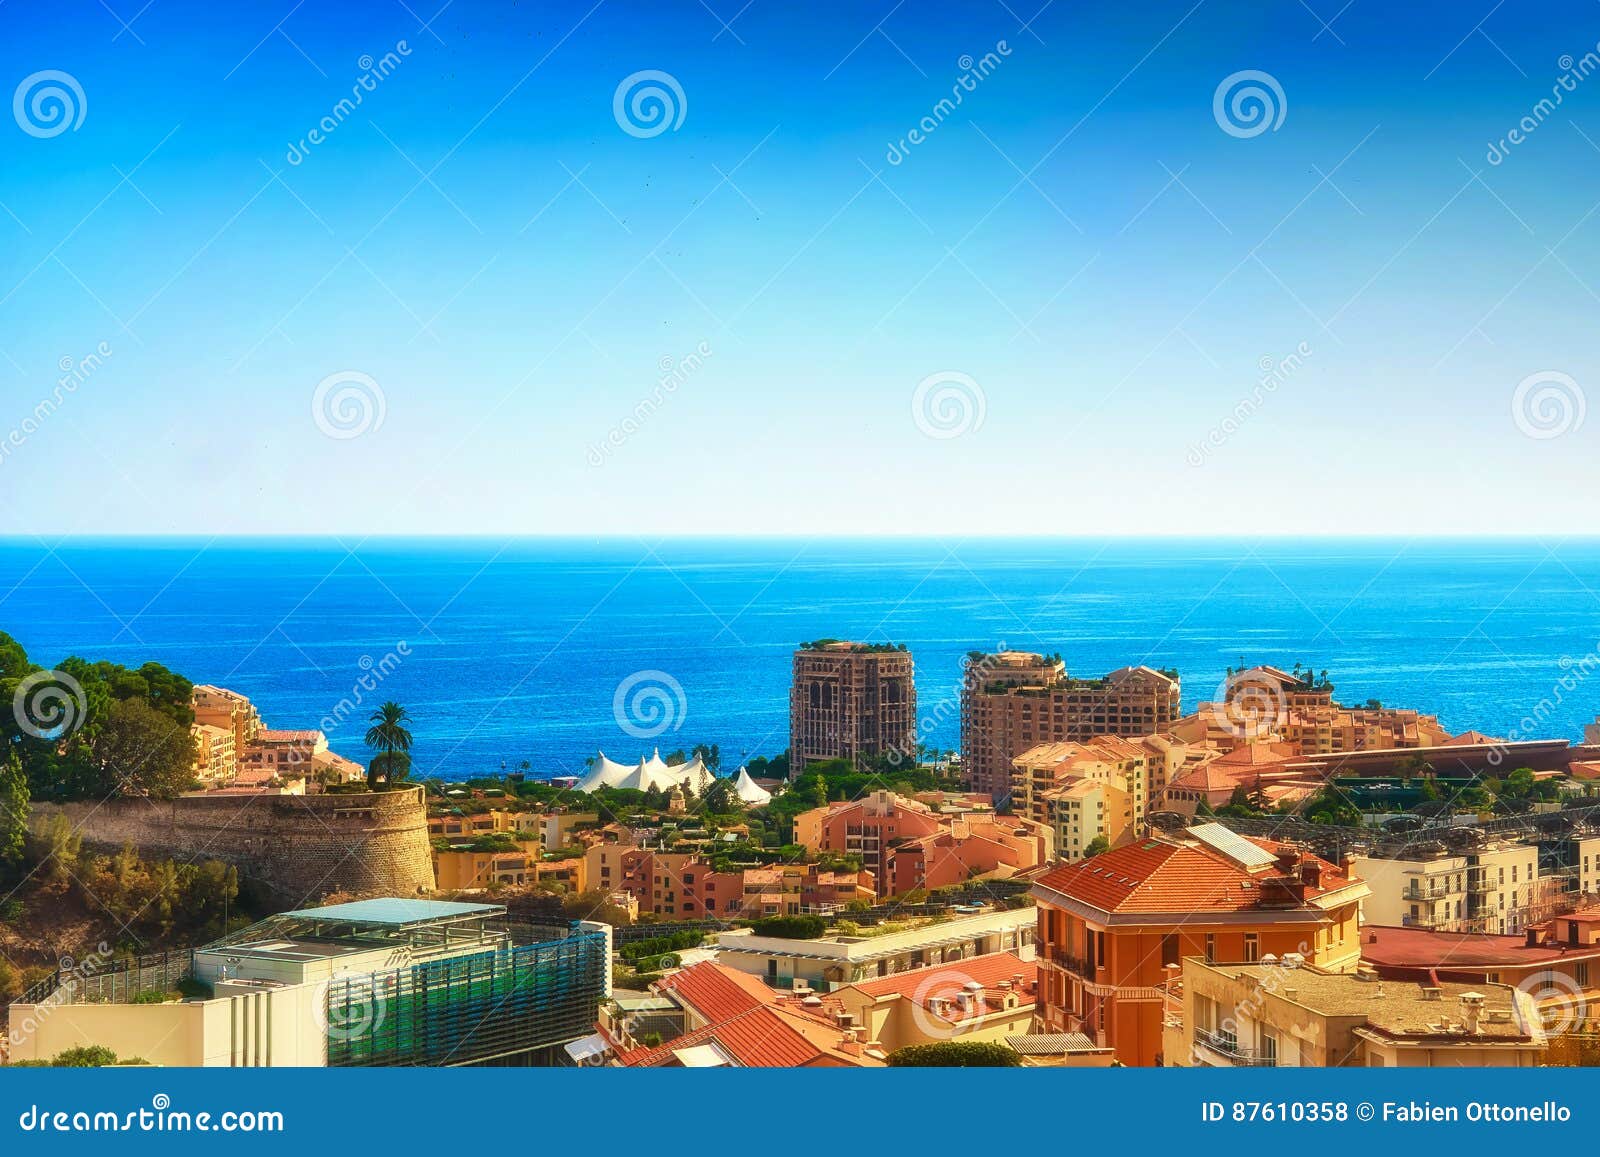 a view of the western part of monaco